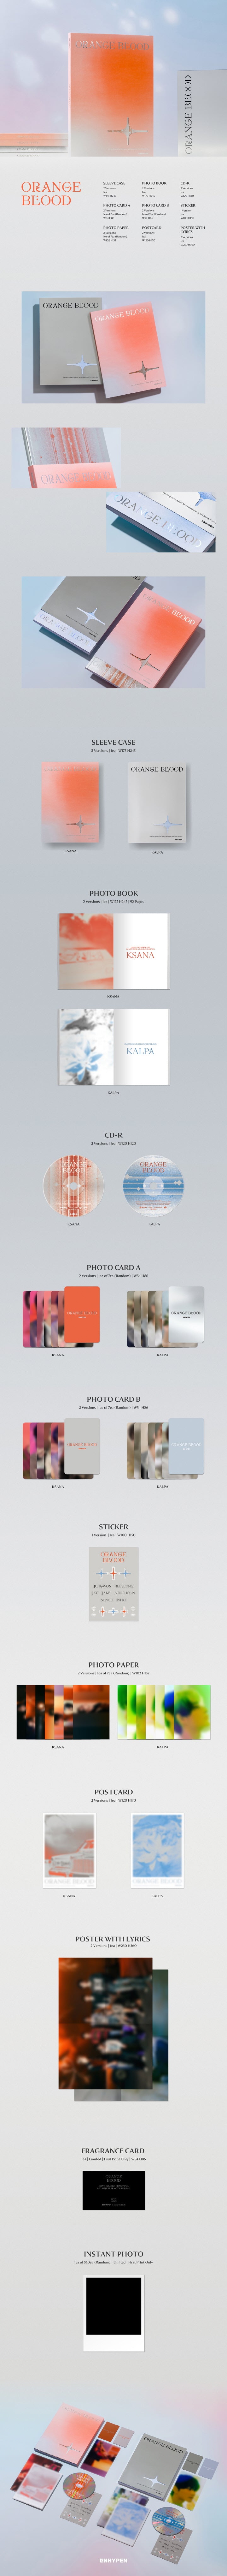 1 CD
1 Photo Book (92 pages)
1 Photo Card A (random out of 7 types)
1 Photo Card B (random out of 7 types)
1 Sticker
1 Pho...